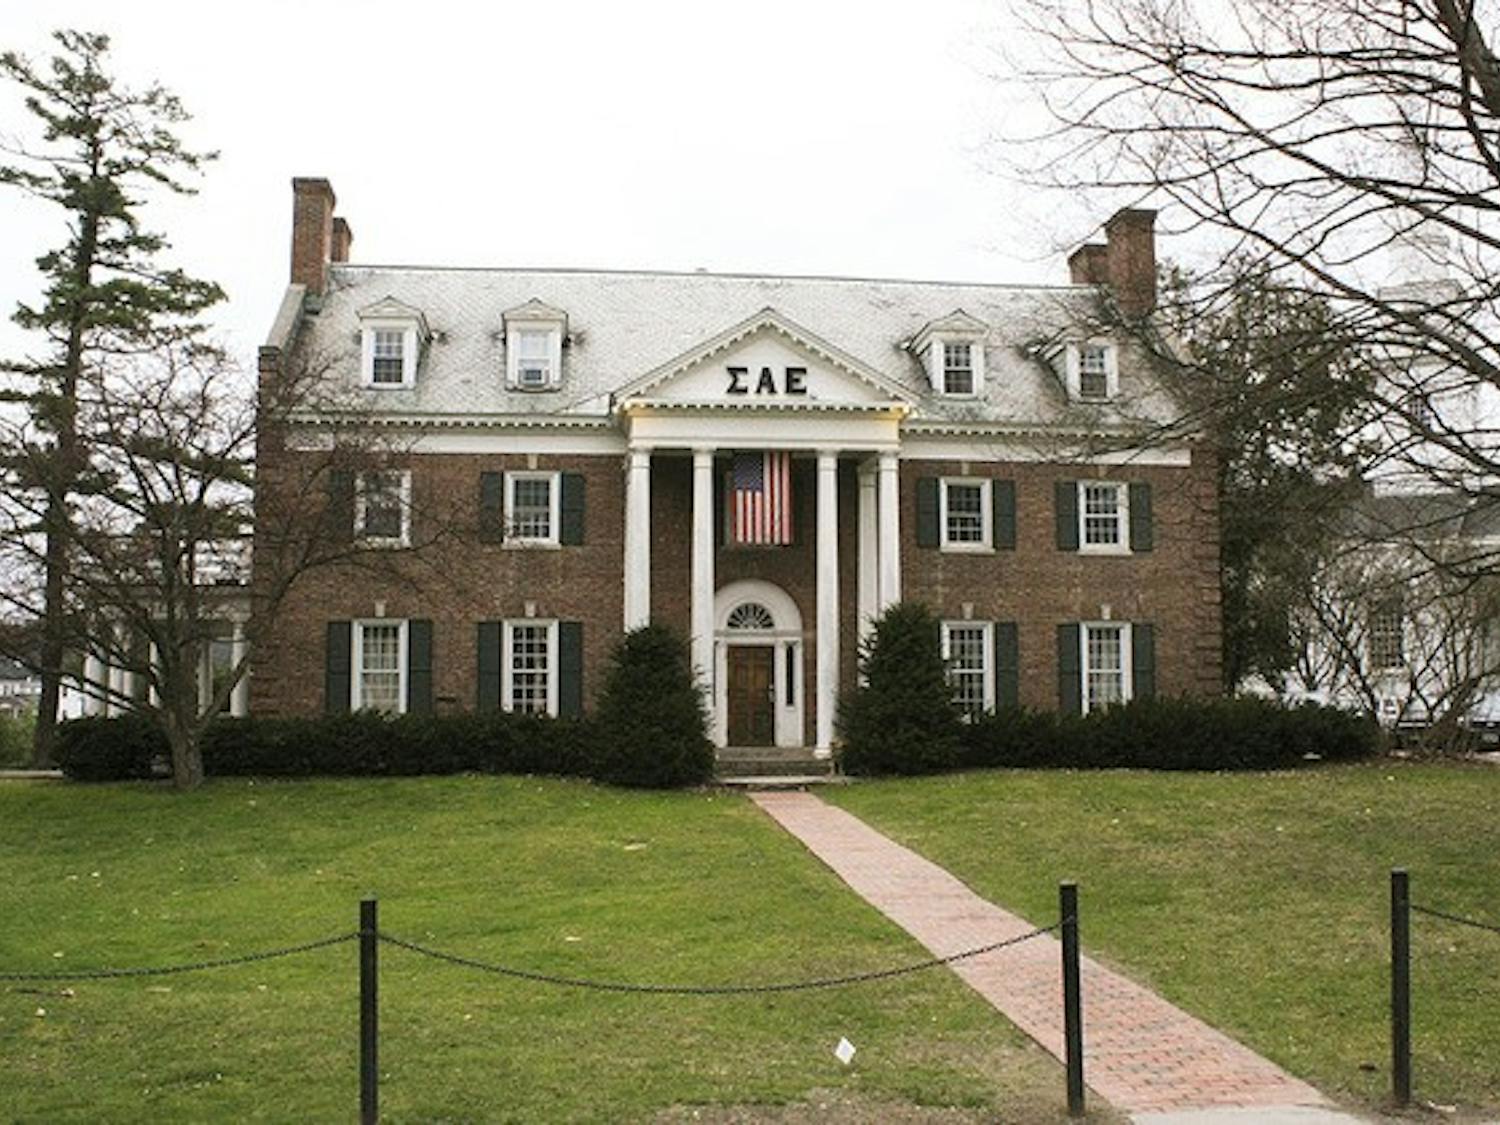 The College's Undergraduate Judicial Affairs Office dropped 24 of the 27 hazing charges against SAE members after obtaining new evidence.